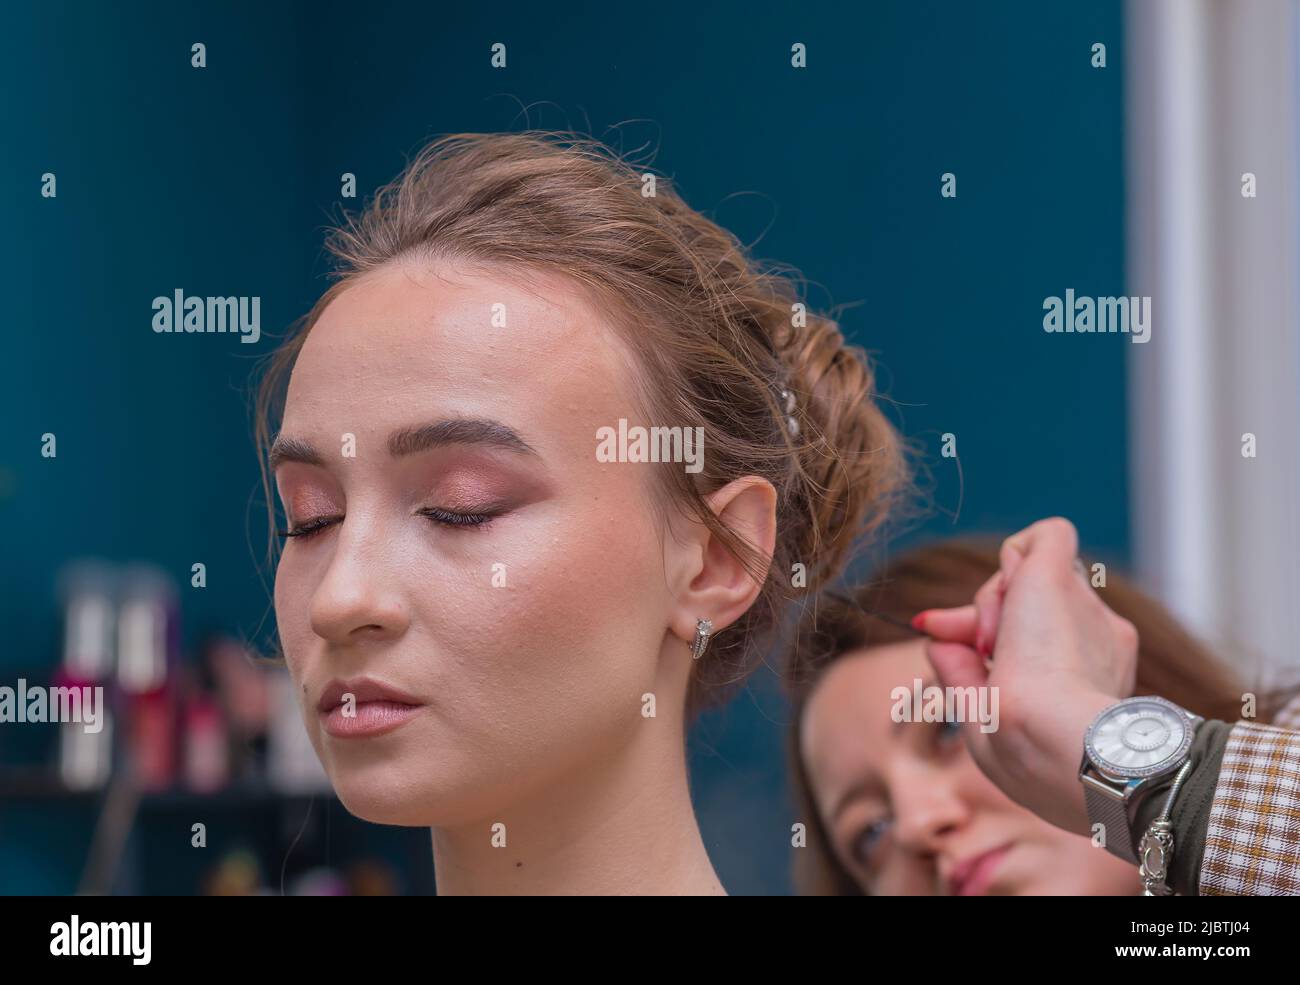 The face of a client's girl, from behind the master examines her hair in defocus. The hairdresser makes a hairstyle for a young woman. Barber shop, business concept. Beauty salon, hair care. Stock Photo